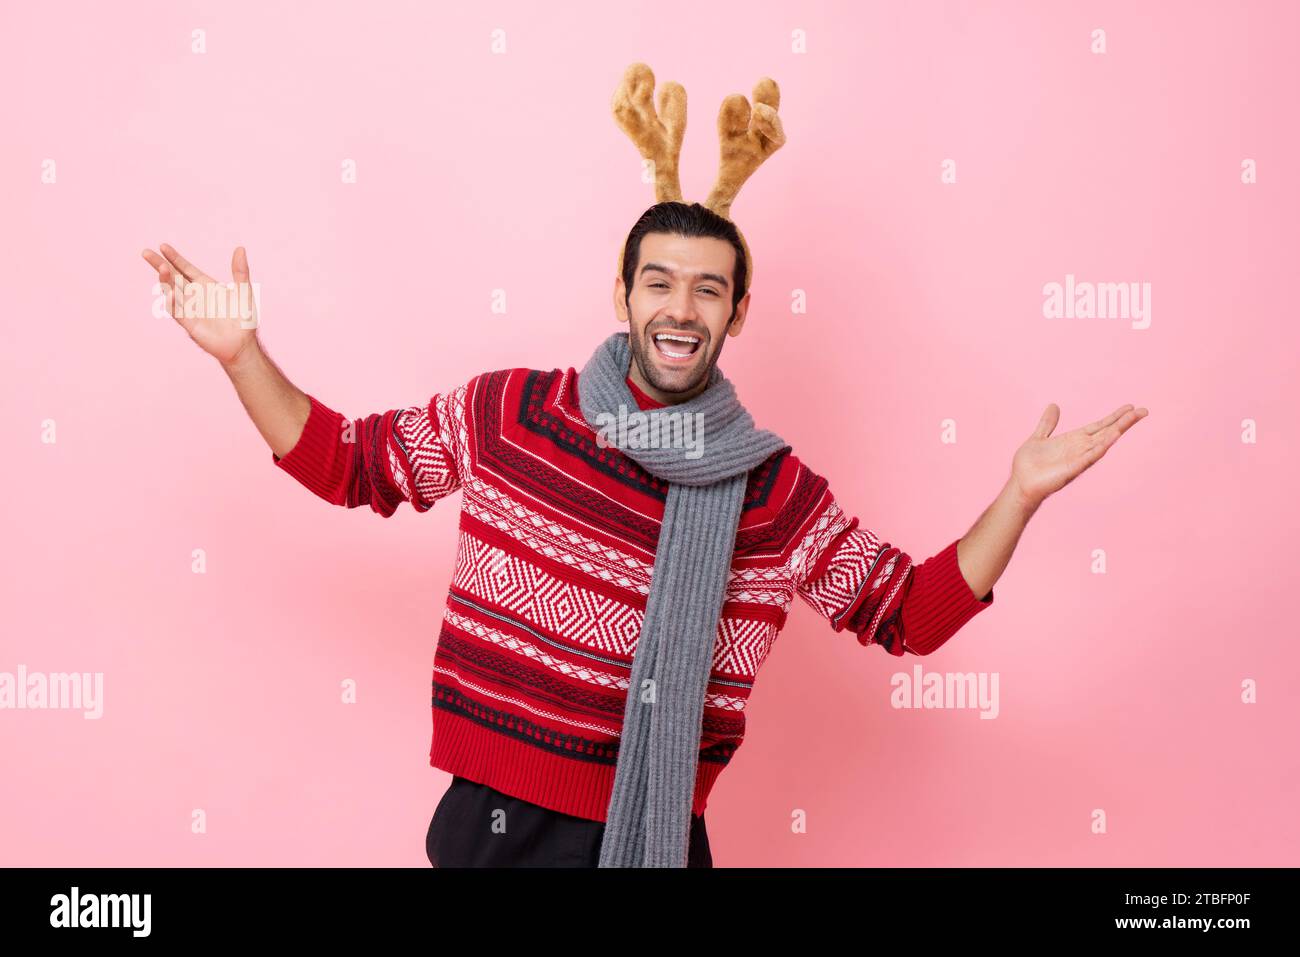 Festive studio shot portrait of smiling Caucasian man wearing Christmas sweater and reindeer headband raising hands with palms opening in pink color i Stock Photo